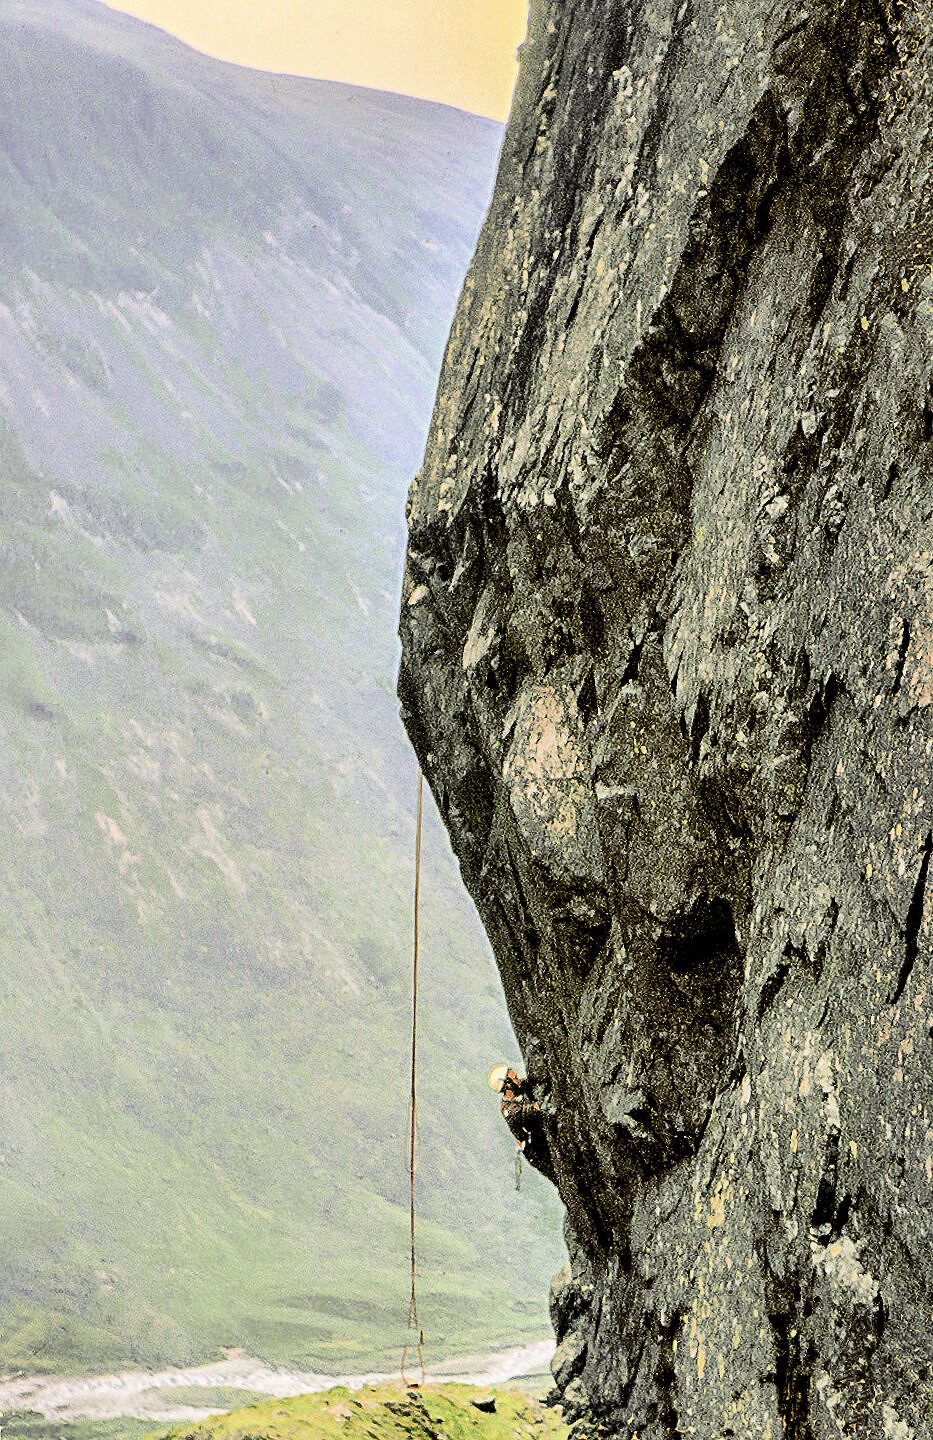 Steve Wilson follows Colin Read on the second ascent of The Vikings, at The Napes. July 1969.  © Tony Marr